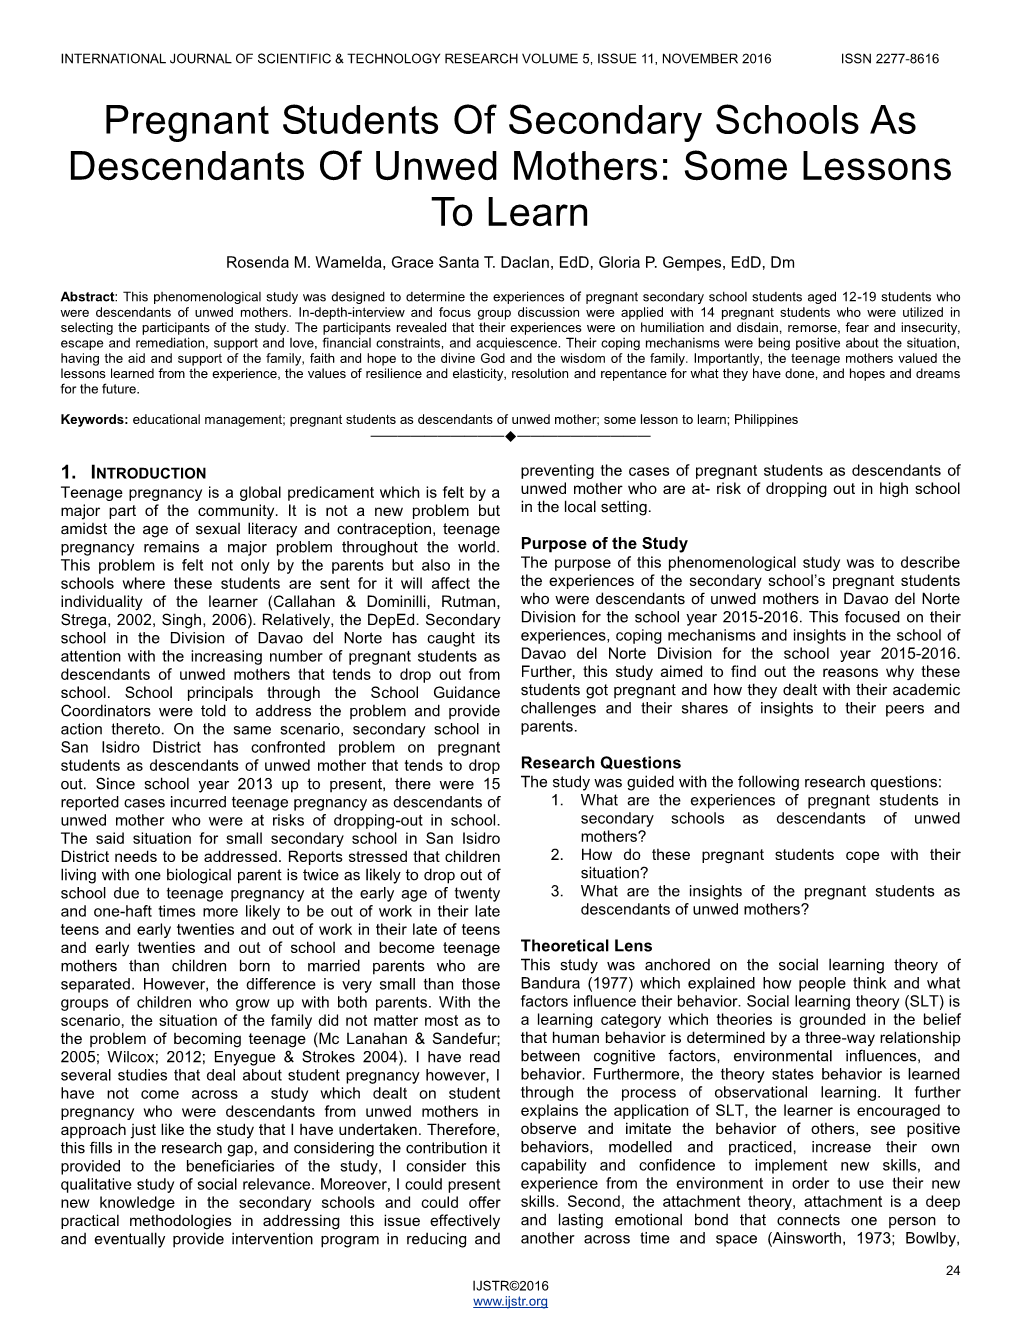 Pregnant Students of Secondary Schools As Descendants of Unwed Mothers: Some Lessons to Learn